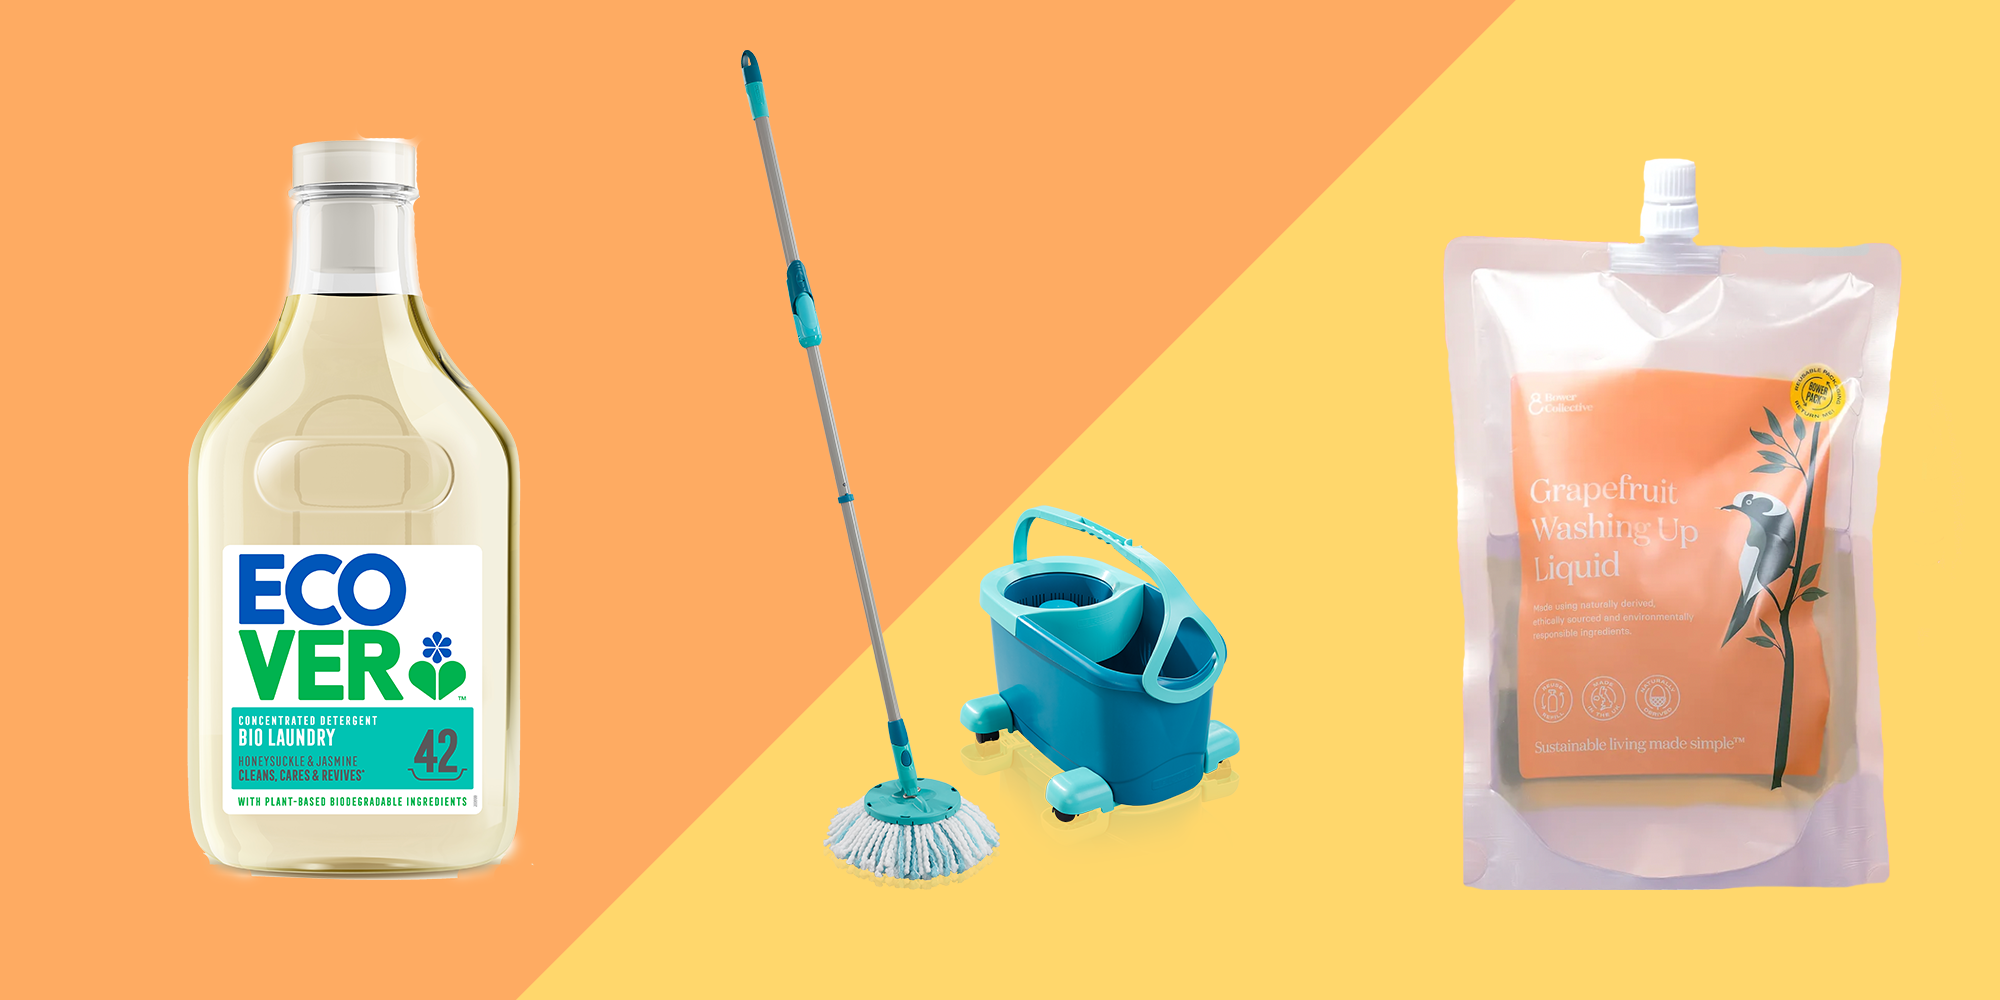 Eco Friendly Cleaning Products Whole House Bundle - Healthier Home Products